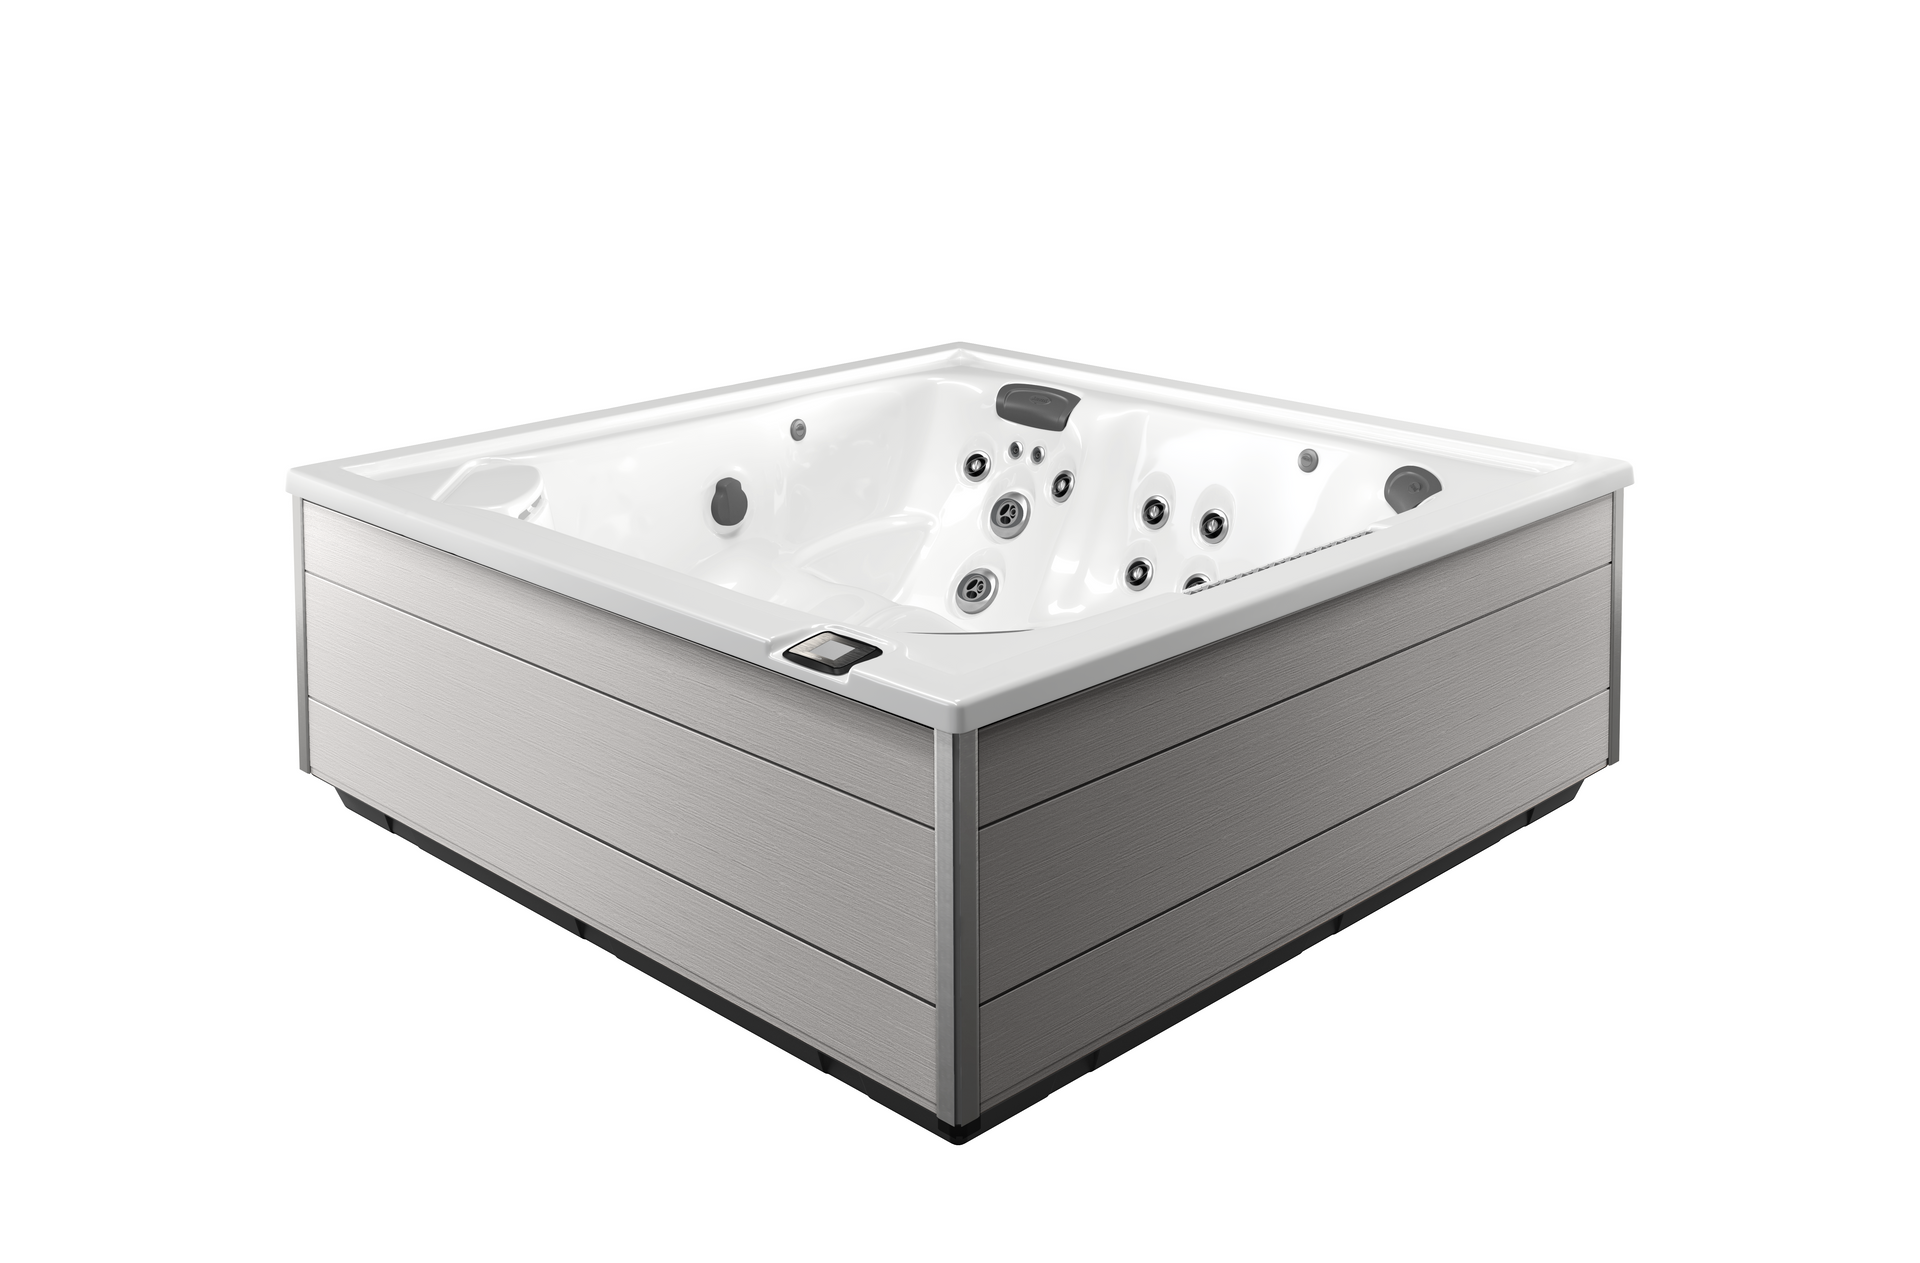 The Jacuzzi J-LXL Offers Patent-Pending IR & Red Light Therapy